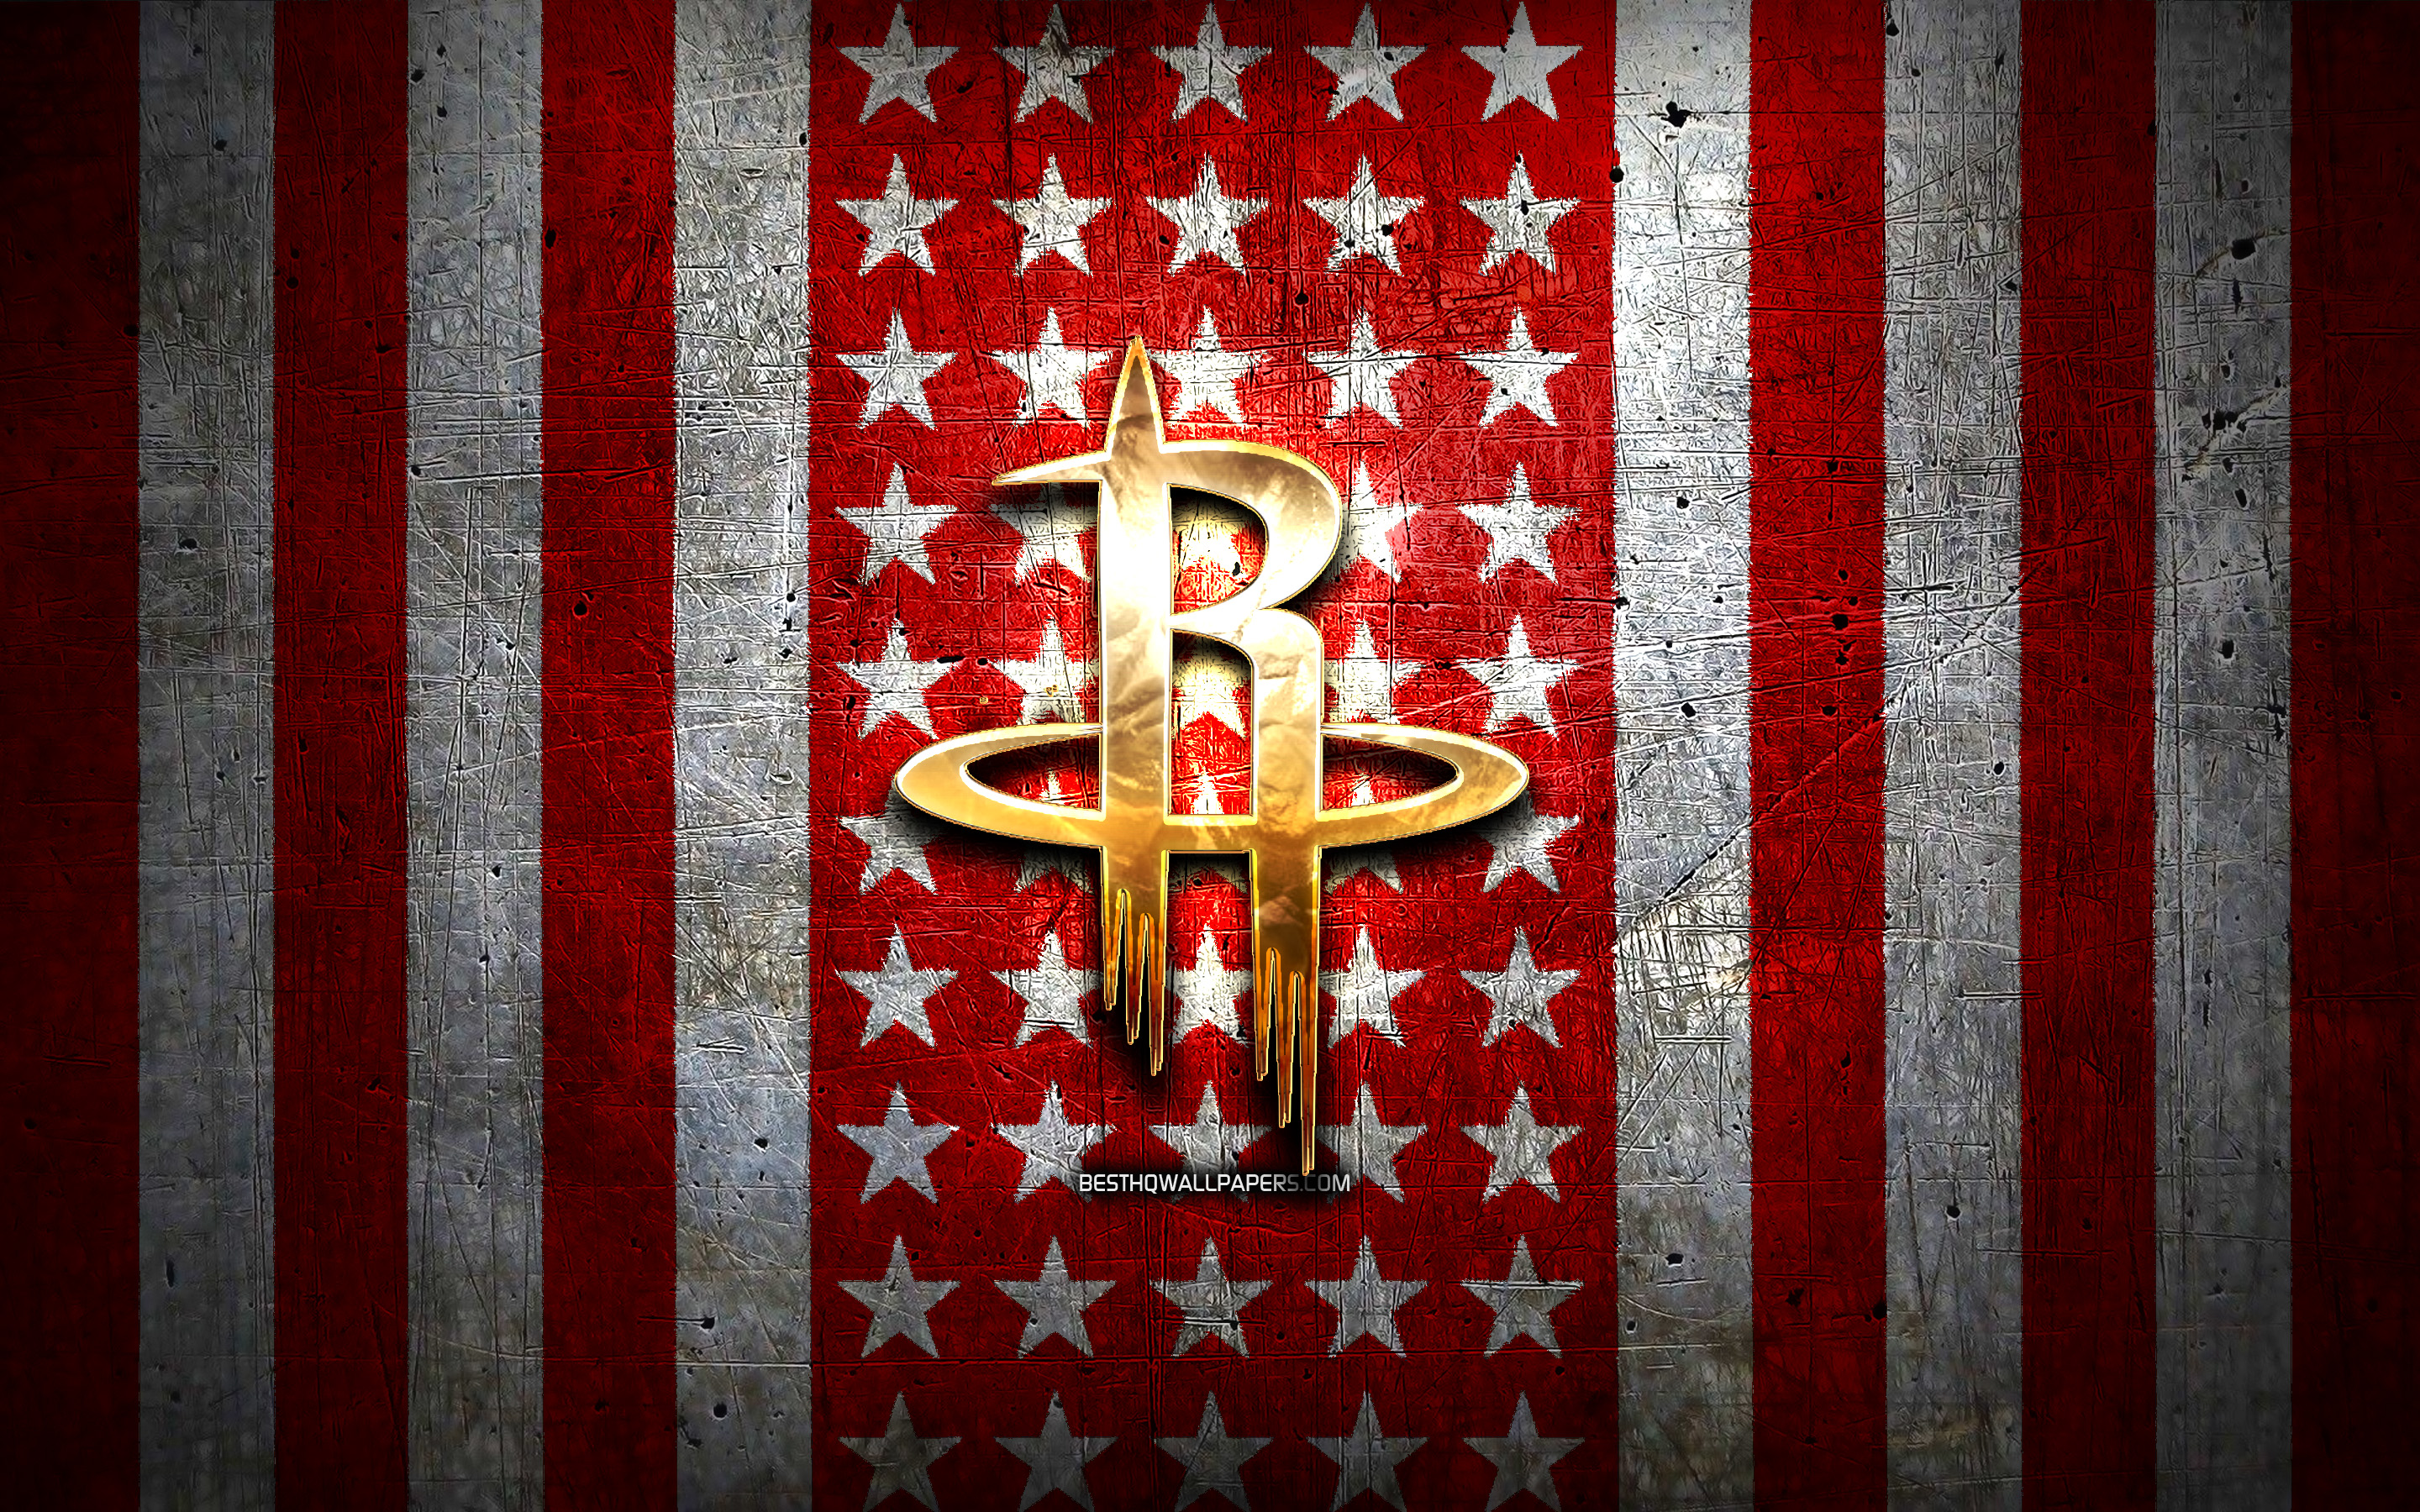 Download wallpaper Houston Rockets flag, NBA, red white metal background, american basketball club, Houston Rockets logo, USA, basketball, golden logo, Houston Rockets for desktop with resolution 2880x1800. High Quality HD picture wallpaper